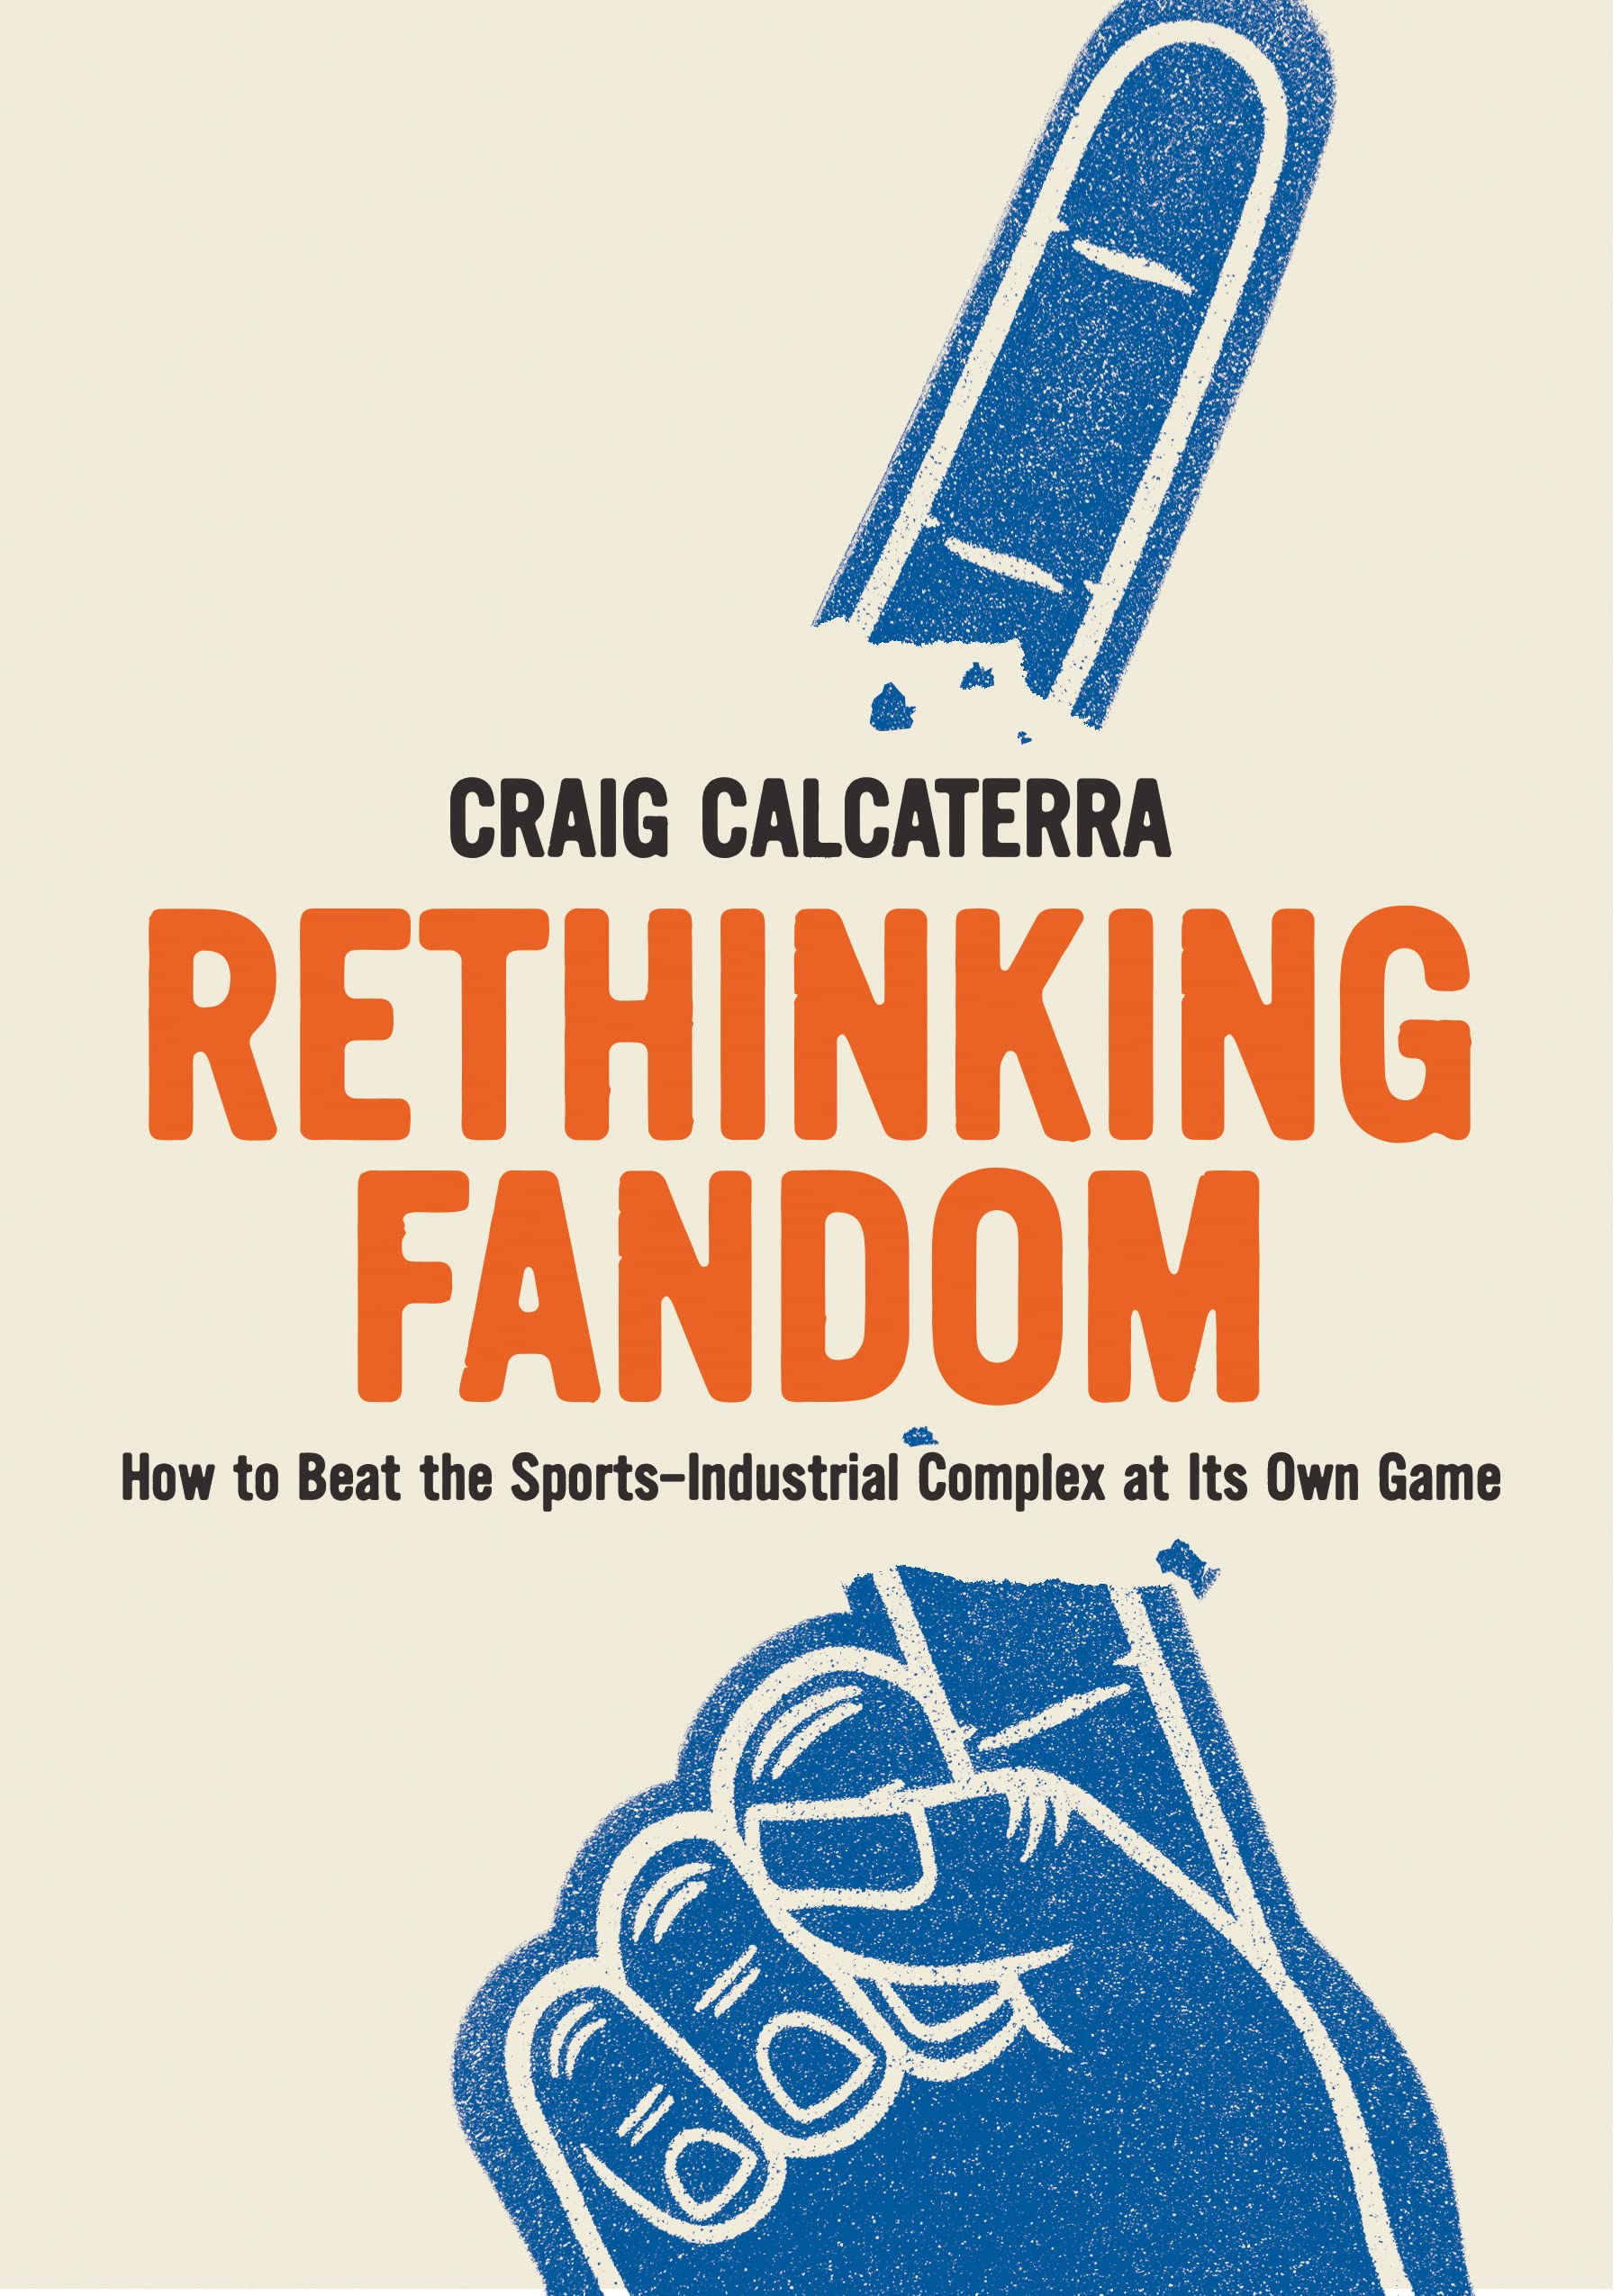 The cover of the book Rethinking Fandom by Craig Calcaterra